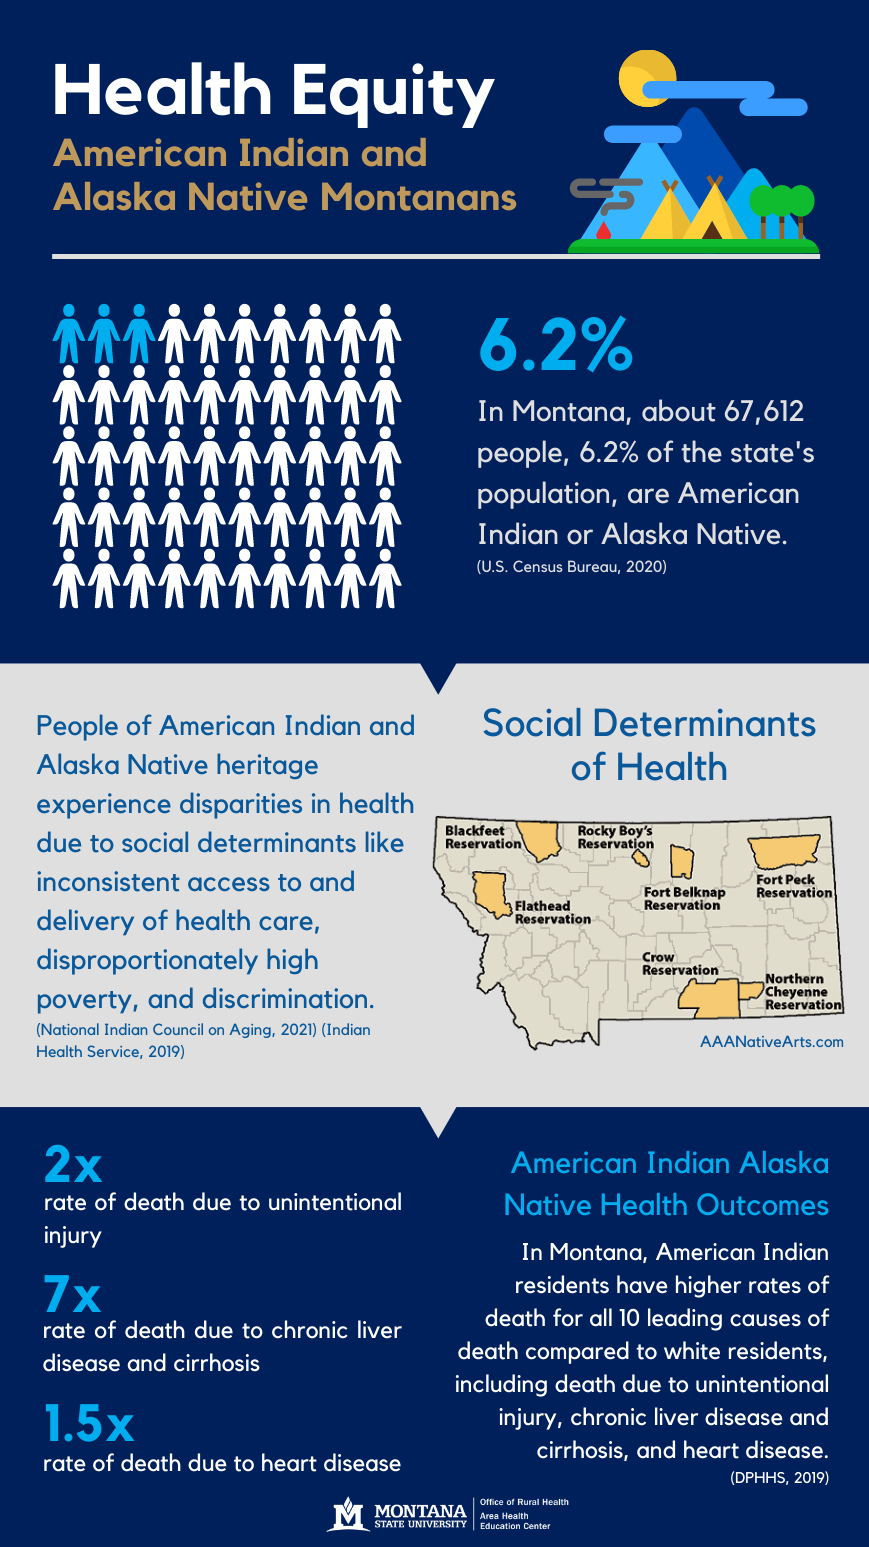 Health Equity - American Indian and Alaska Native Montanans. In Montana, about 67,612 people, 6.2% of the state's population, are American Indian or Alaska Native. (U.S. Census Bureau, 2020). Social Determinants of Health -People of American Indian and Alaska Native heritage experience disparities in health due to social determinants like inconsistent access to and delivery of health care, disproportionately high poverty, and discrimination. (National Indian Council on Aging, 2021) (Indian Health Service, 2019). Map of Montana highlighting the tribal reservations: Flathead, Blackfeet, Rocky Boy's, Fort Belknap, Fort Peck, Crow, and Northern Cheyenne. In Montana, American Indian residents have higher rates of death for all 10 leading causes of death compared to white residents, including death due to unintentional injury, chronic liver disease and cirrhosis, and heart disease. (DPHHS, 2019). 2x rate of death due to unintentional injury. 7x rate of death due to chronic liver disease and cirrhosis. 1.5x rate of death due to heart disease.  